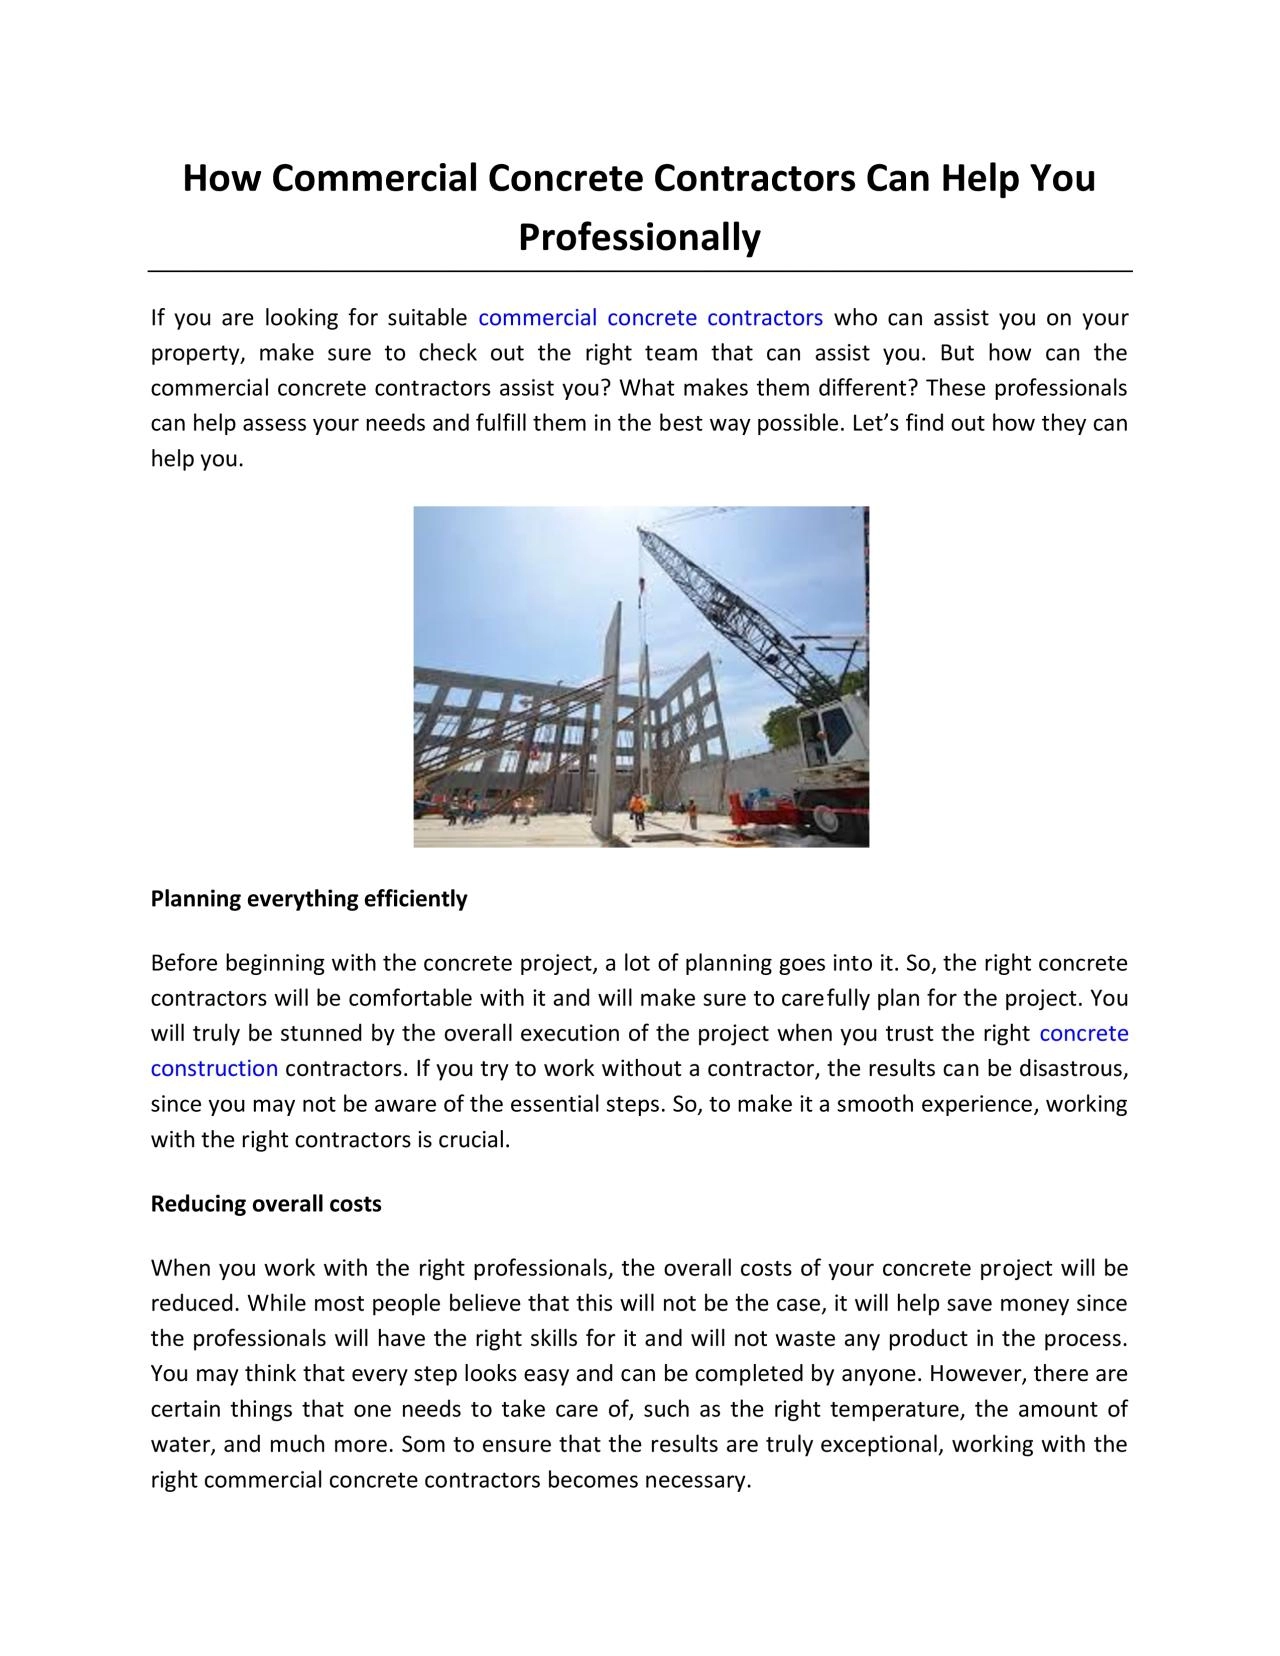 How Commercial Concrete Contractors Can Help You Professionally